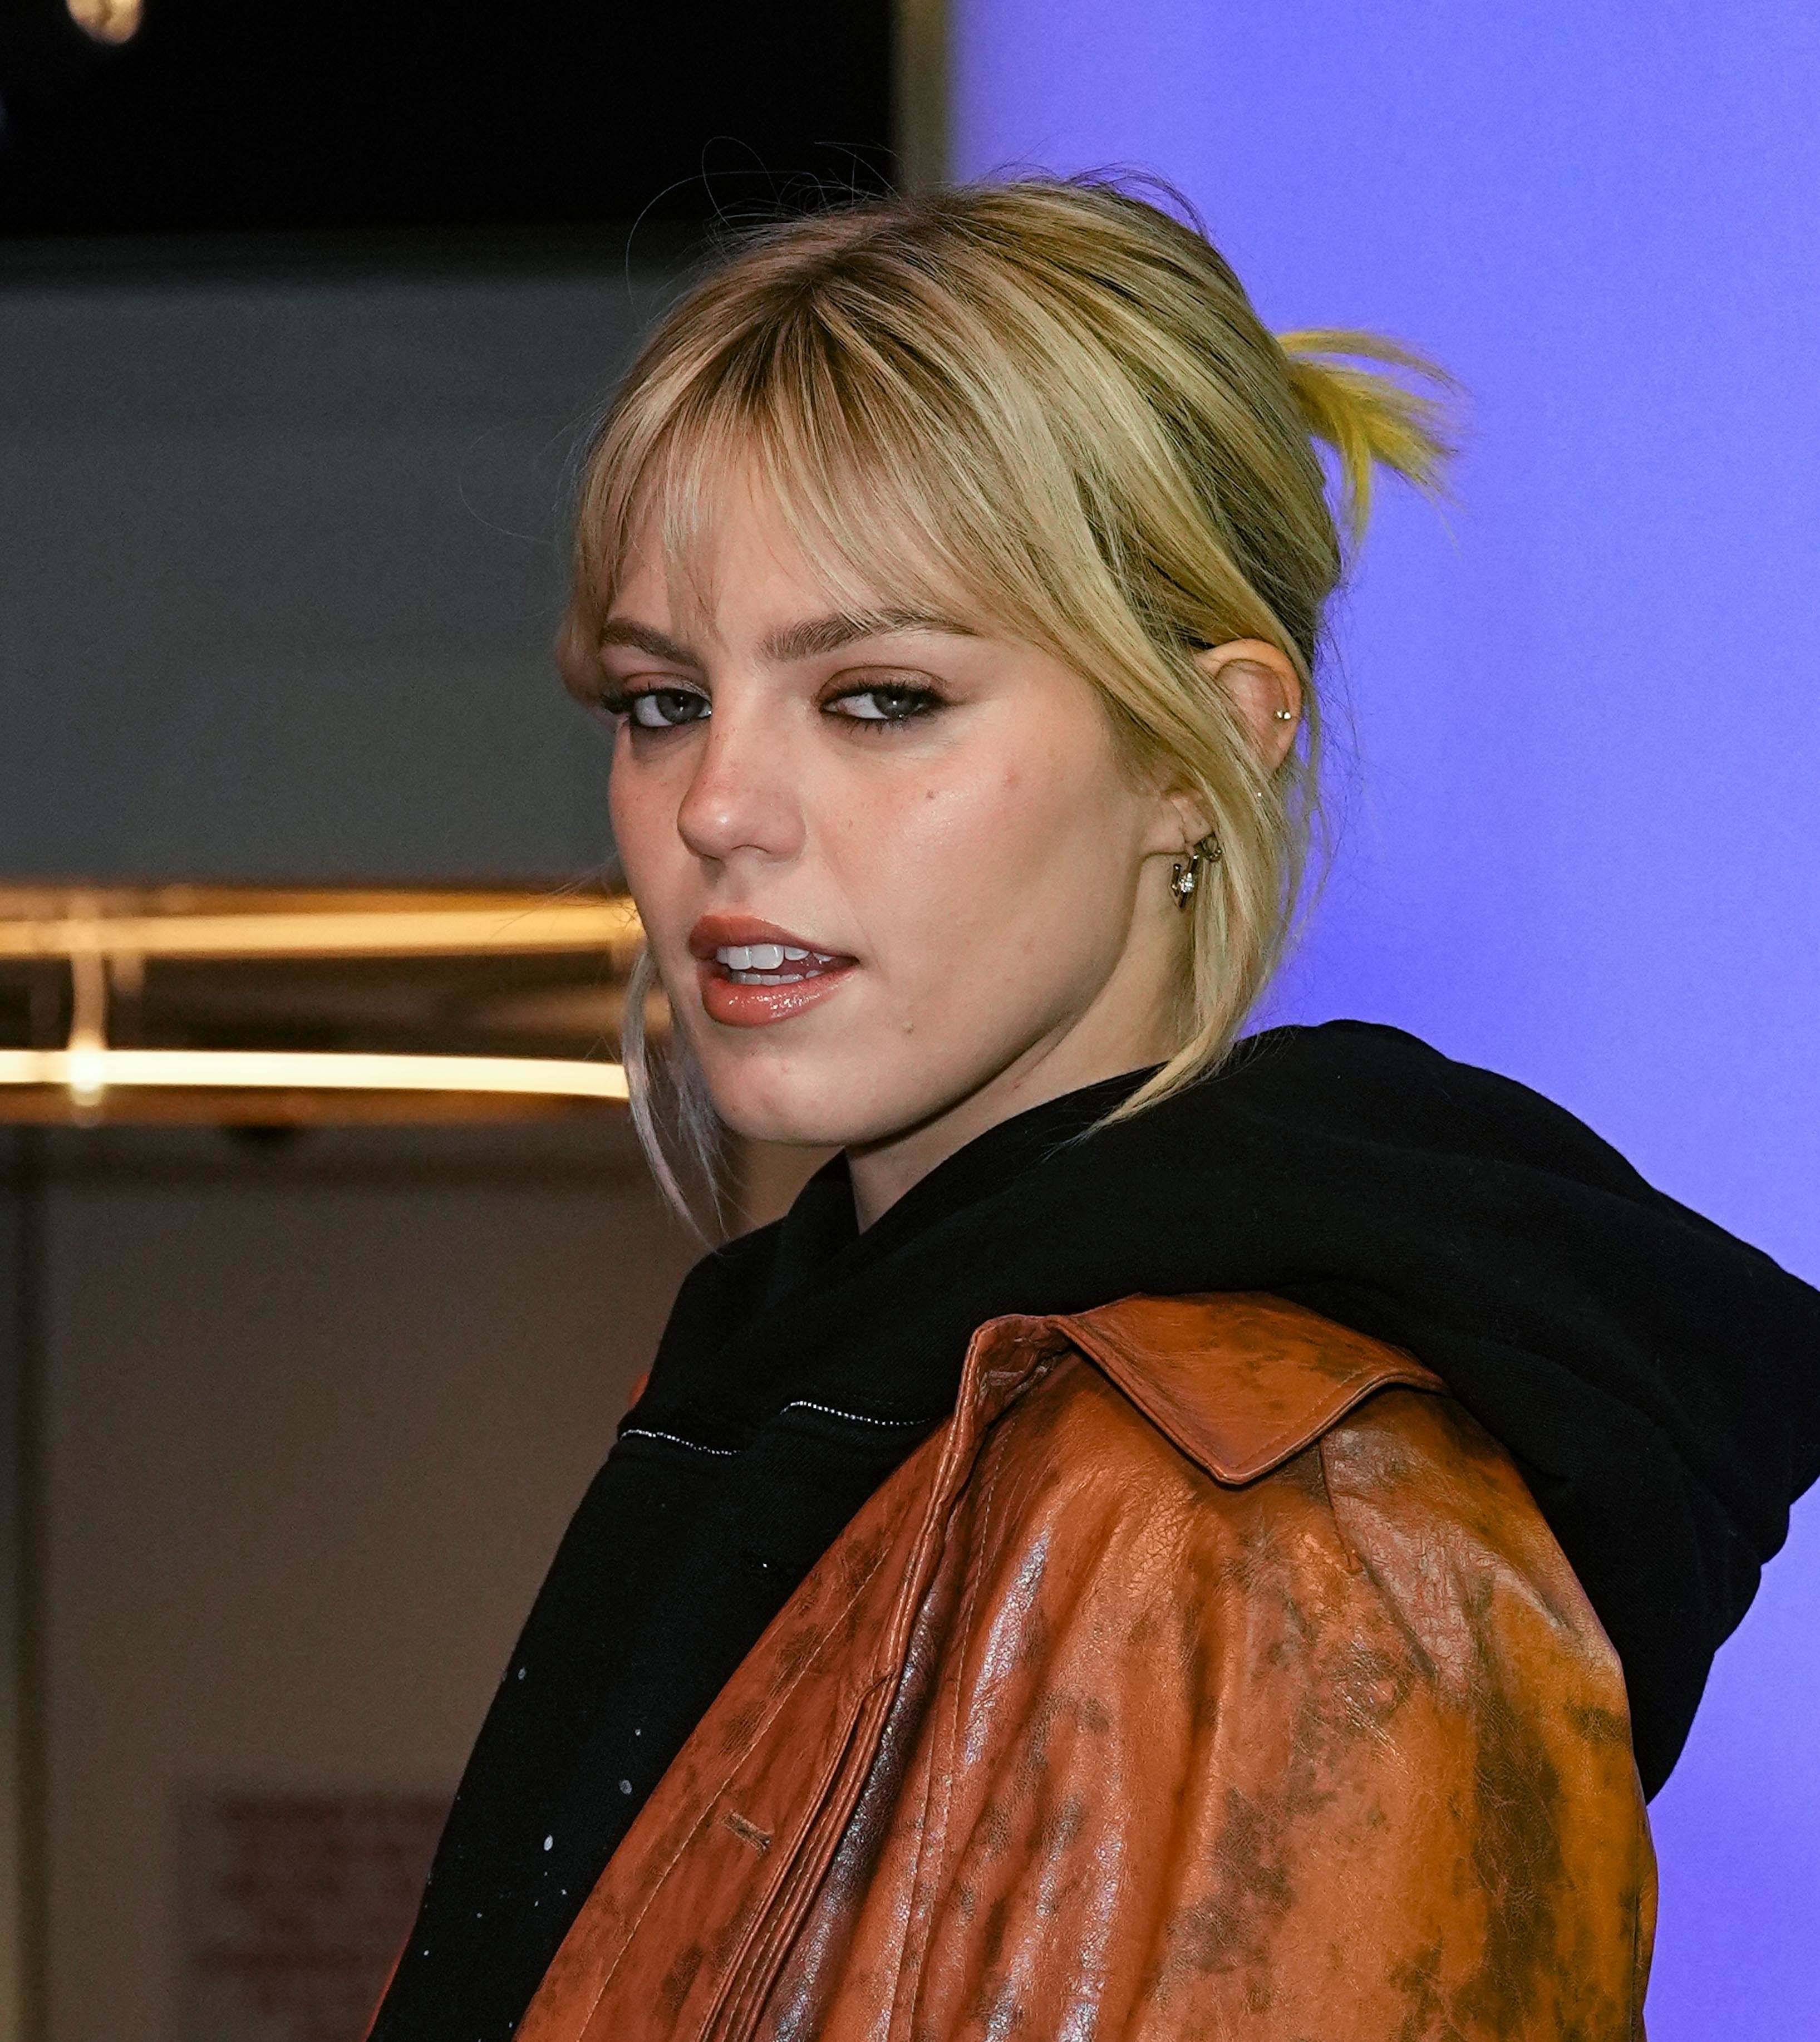 Reneé Rapp wearing a leather jacket with a messy bun hairstyle, facing sideways